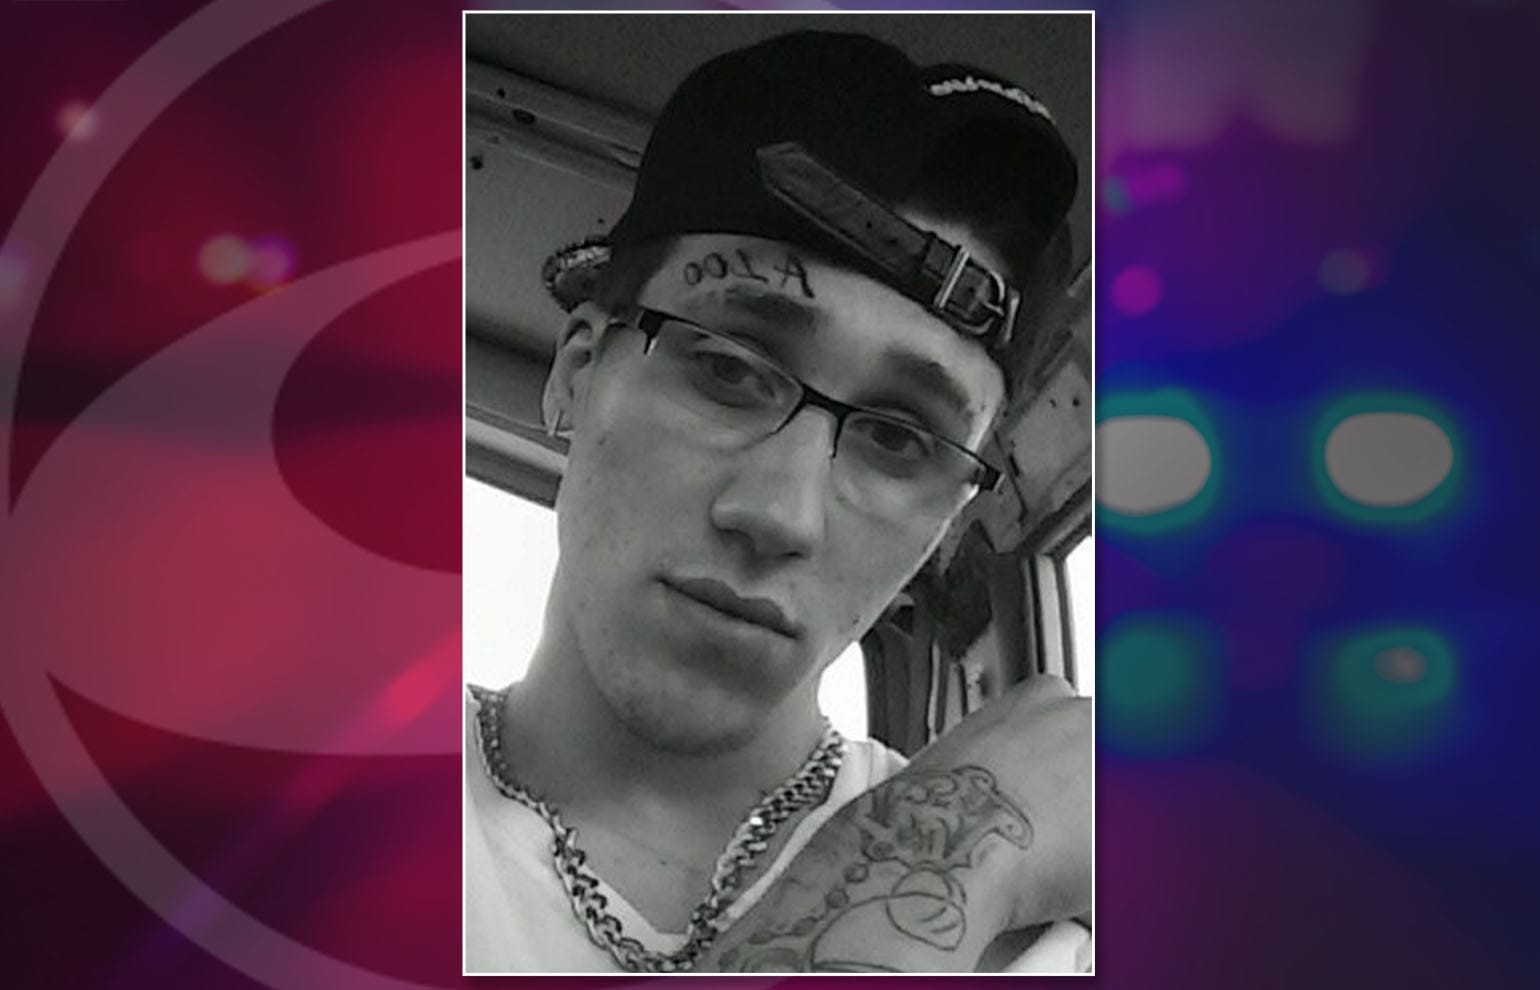 Dalton Marshall of Vancouver was 19 when he was killed Nov. 12, 2015.